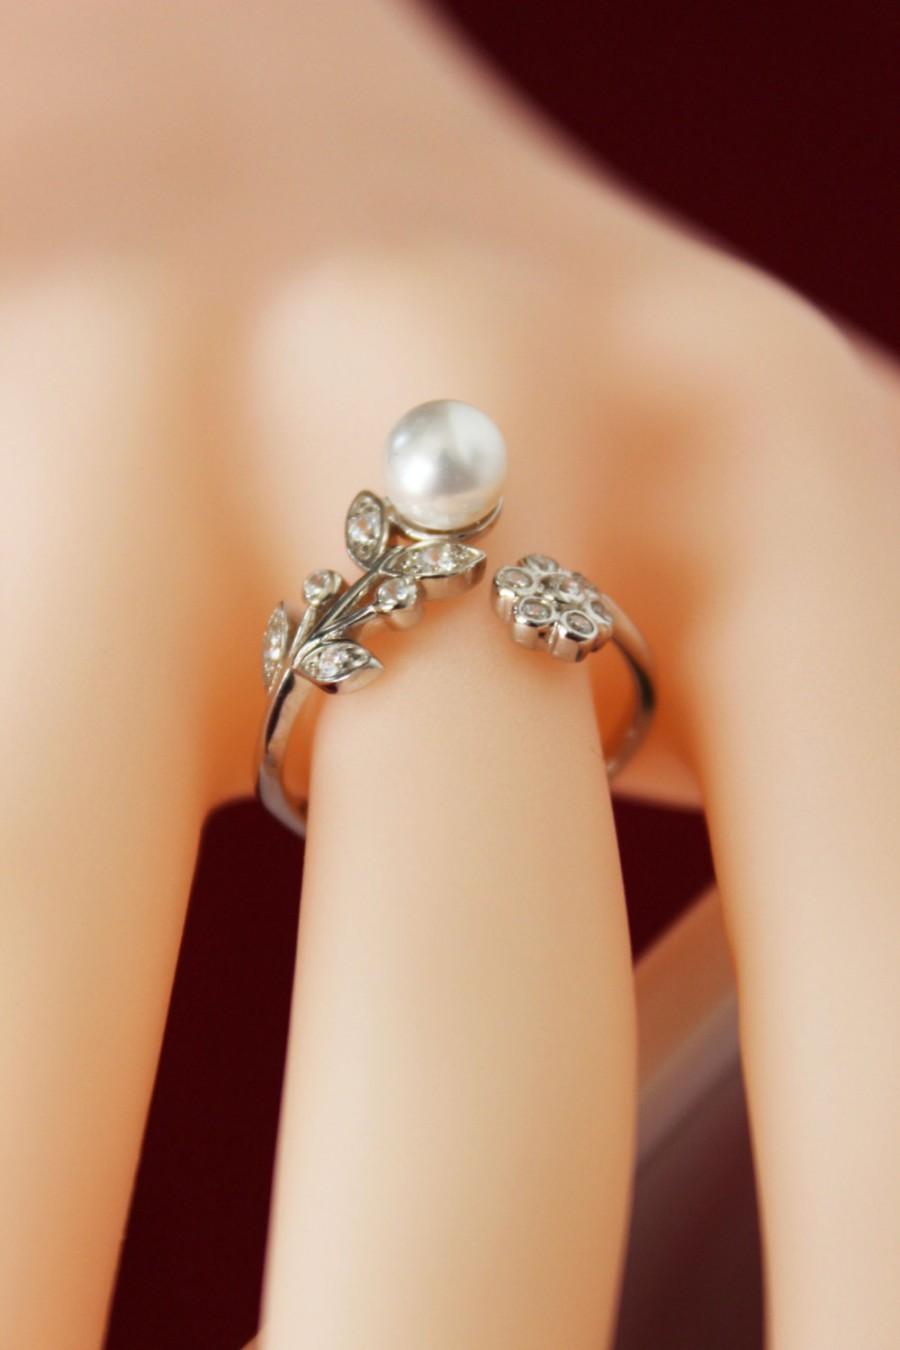 Mariage - Cubic Zirconia Bridesmaids Ring, Sterling Silver Flower Ring, Pearl Wedding Ring, Bridal Ring, Perfect Gift for Bridesmaids, Pearl Ring